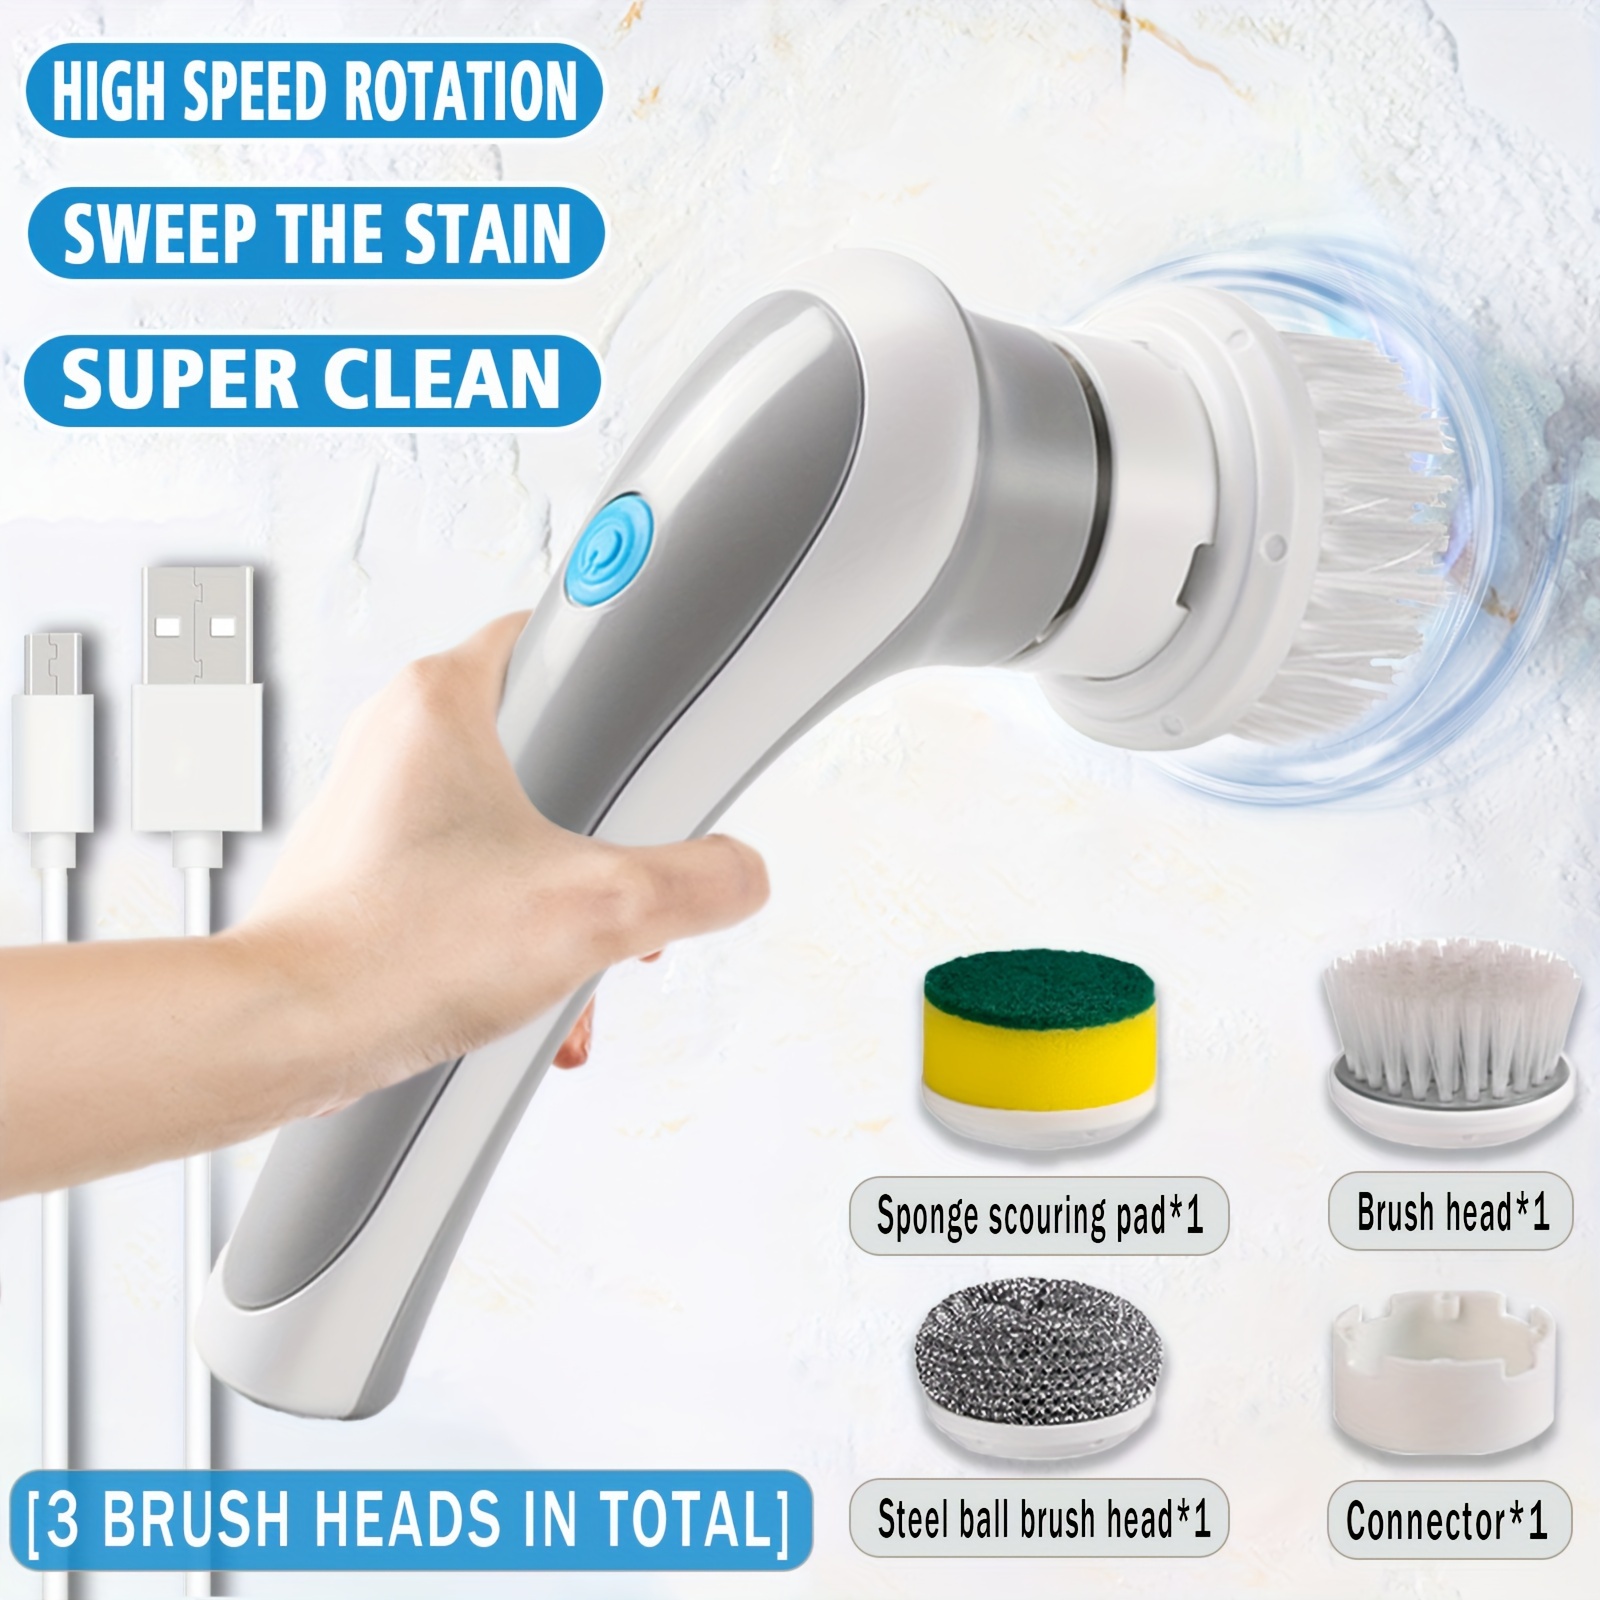 Electric Cleaning Brush 4 in 1 Handheld Kitchen Cleaner - Temu